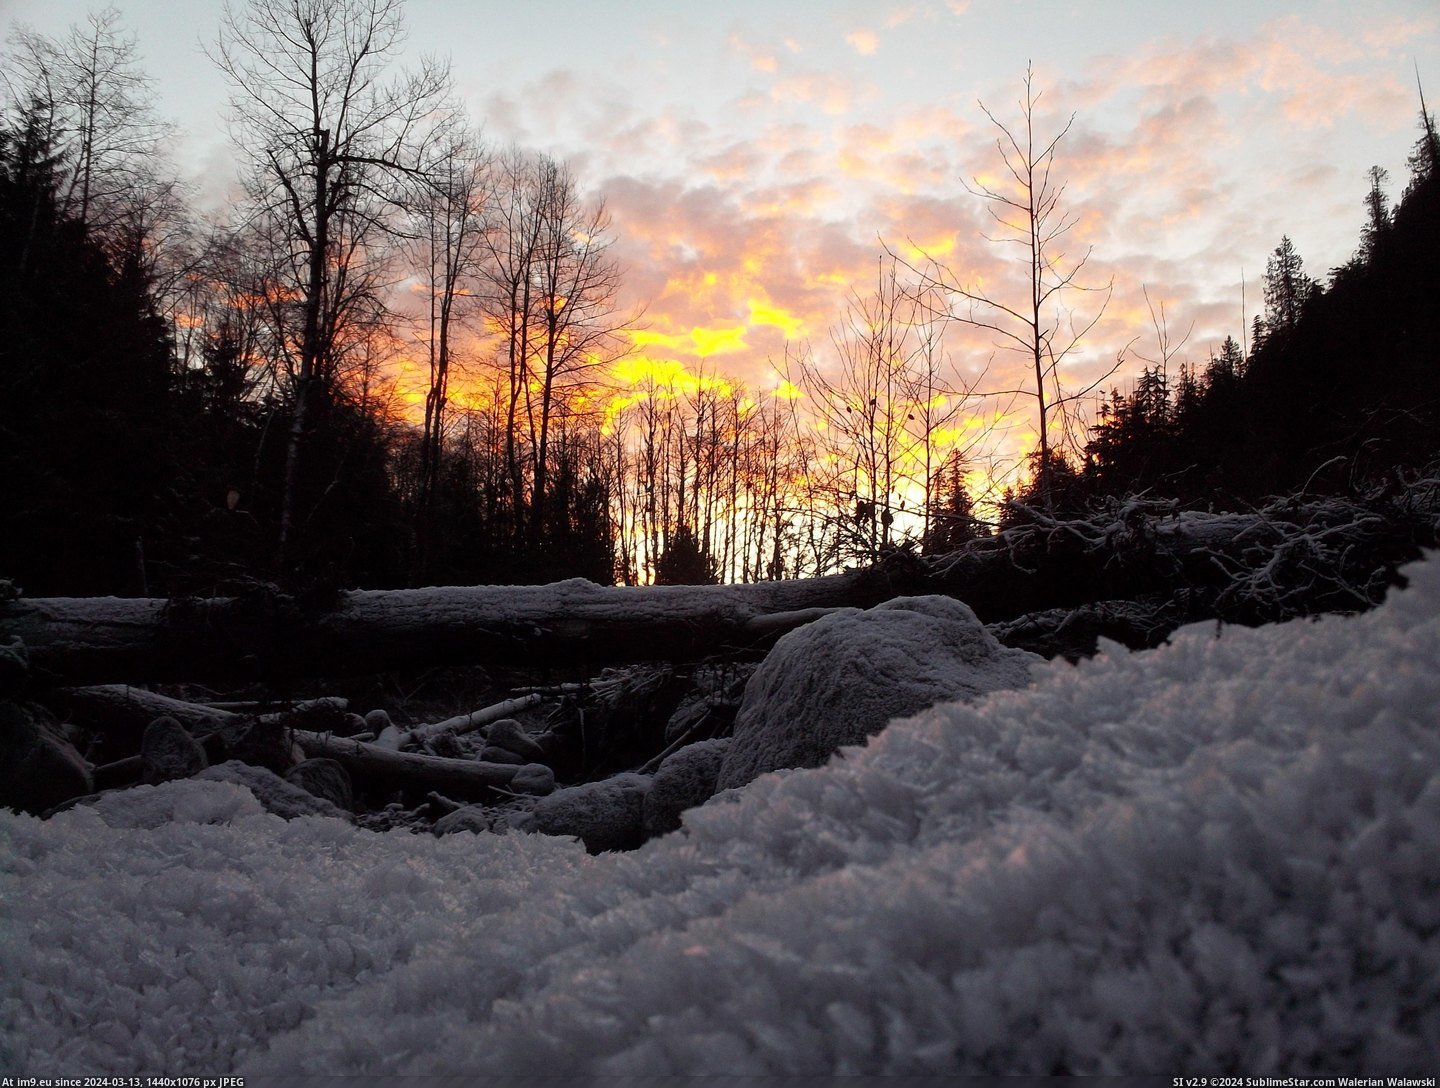 #State #River #Ice #Fork #Nooksack #Fire #Sunrise #4000x3000 [Earthporn] Fire and Ice. Sunrise near the Middle Fork of the Nooksack River-WA state. [OC](4000x3000) Pic. (Bild von album My r/EARTHPORN favs))